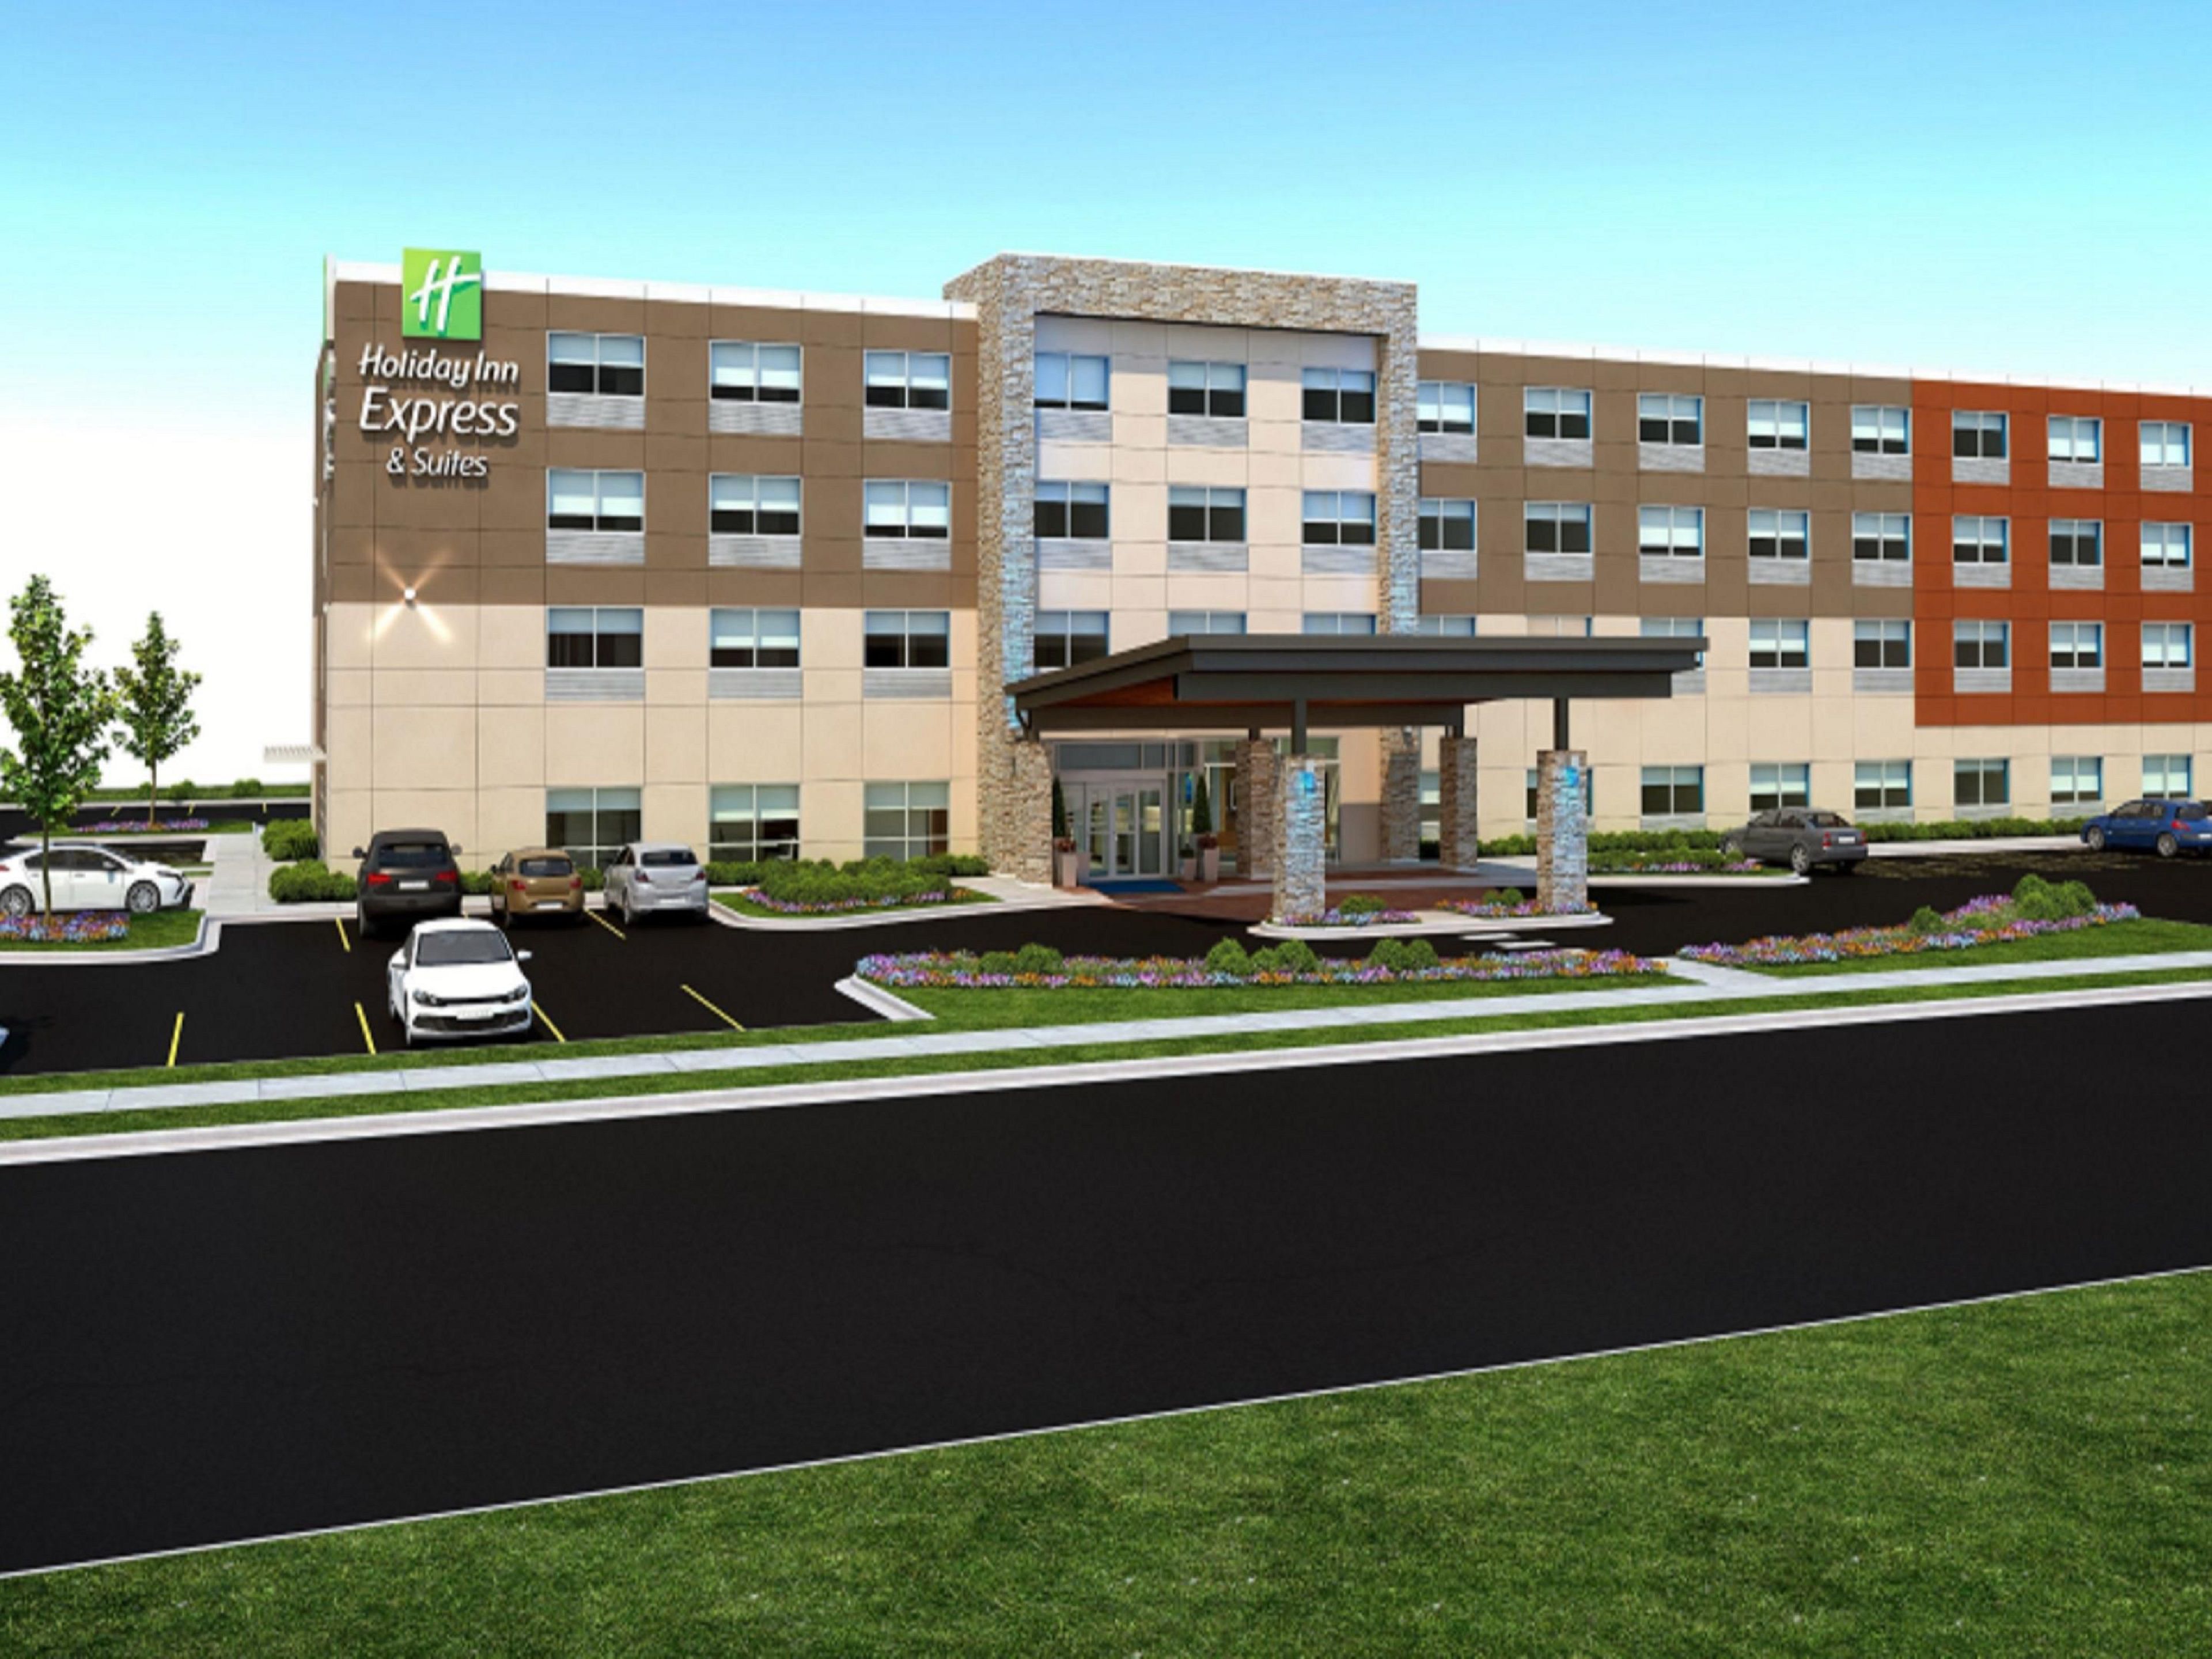 Holiday Inn Express & Suites Greenwood in Greenwood, MS | Whitepages